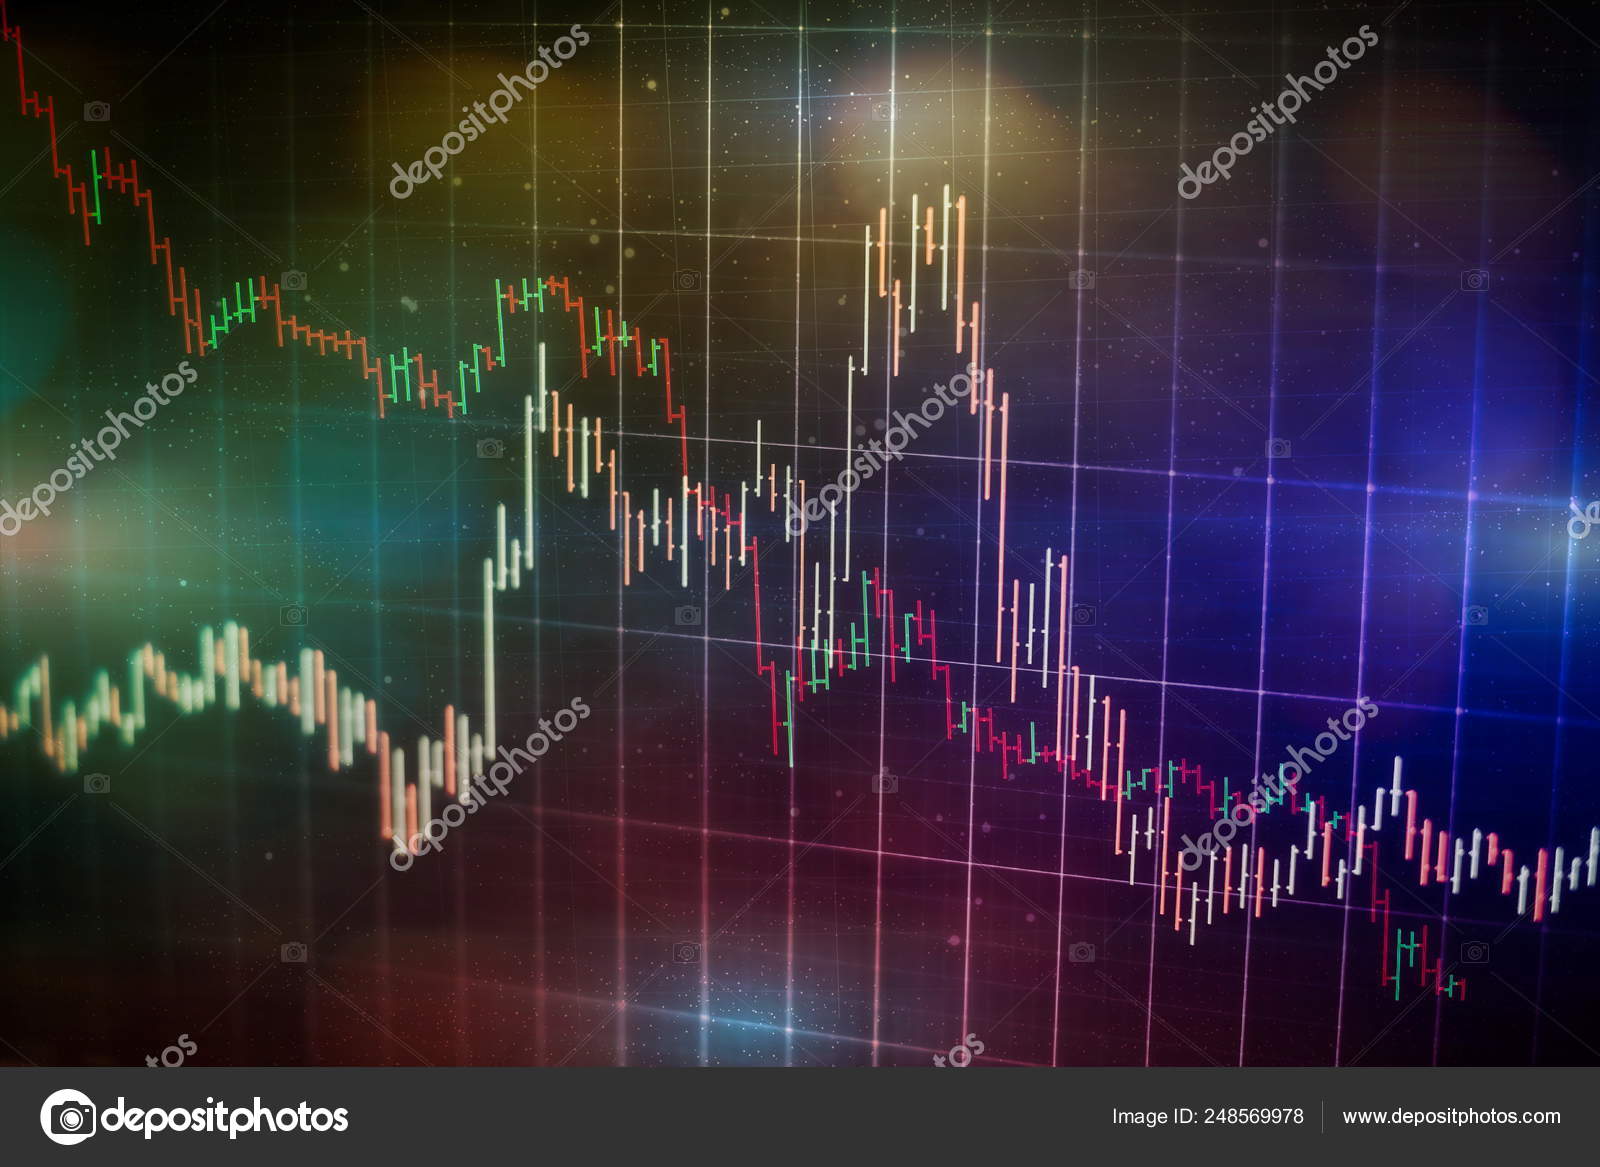 Candlestick Charting Poster